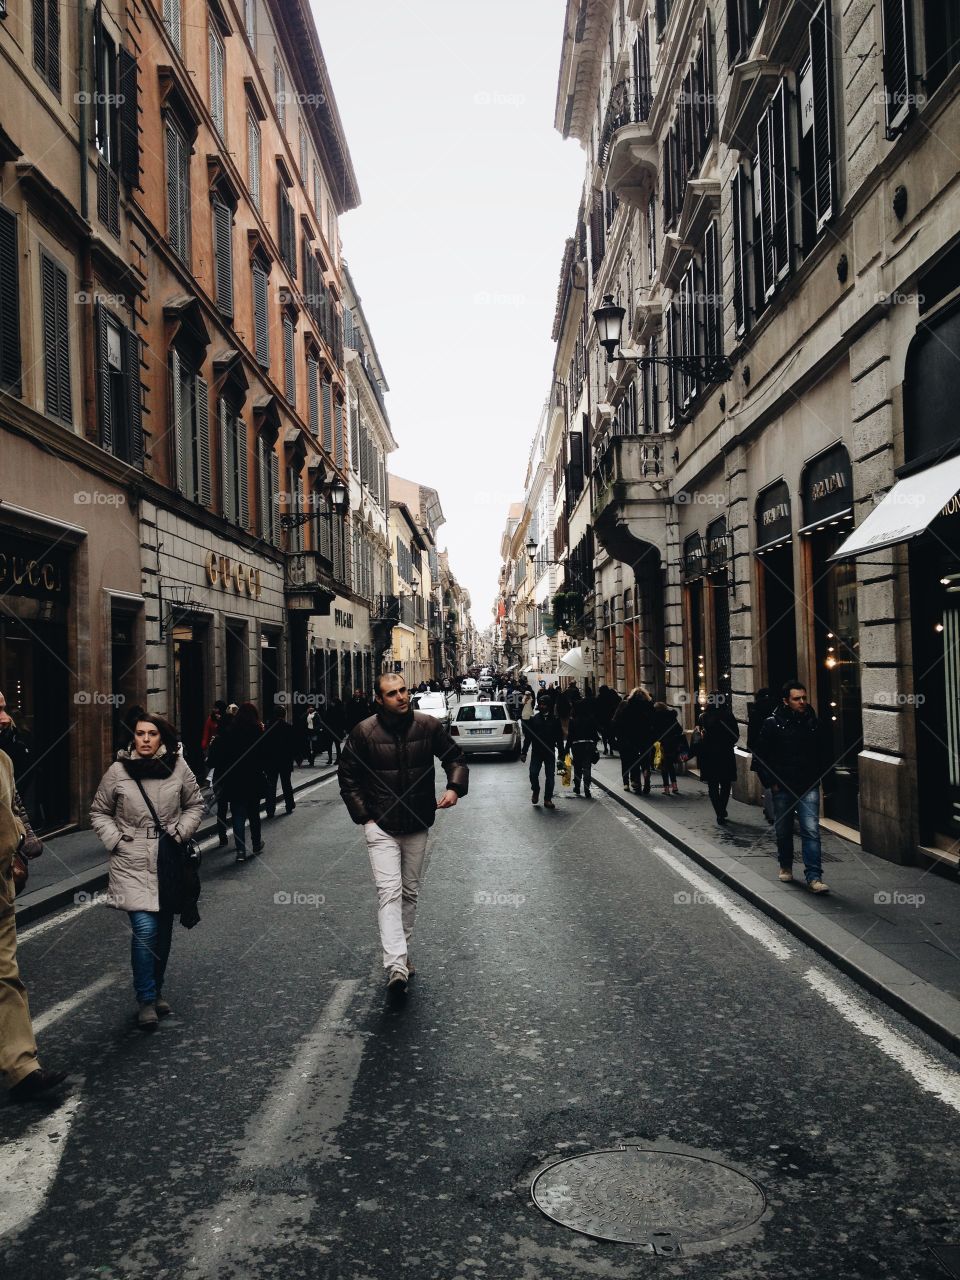  A Runway Made of Concrete. People walking full of fashion in Rome's most luxurious street, Via dei Condotti. 